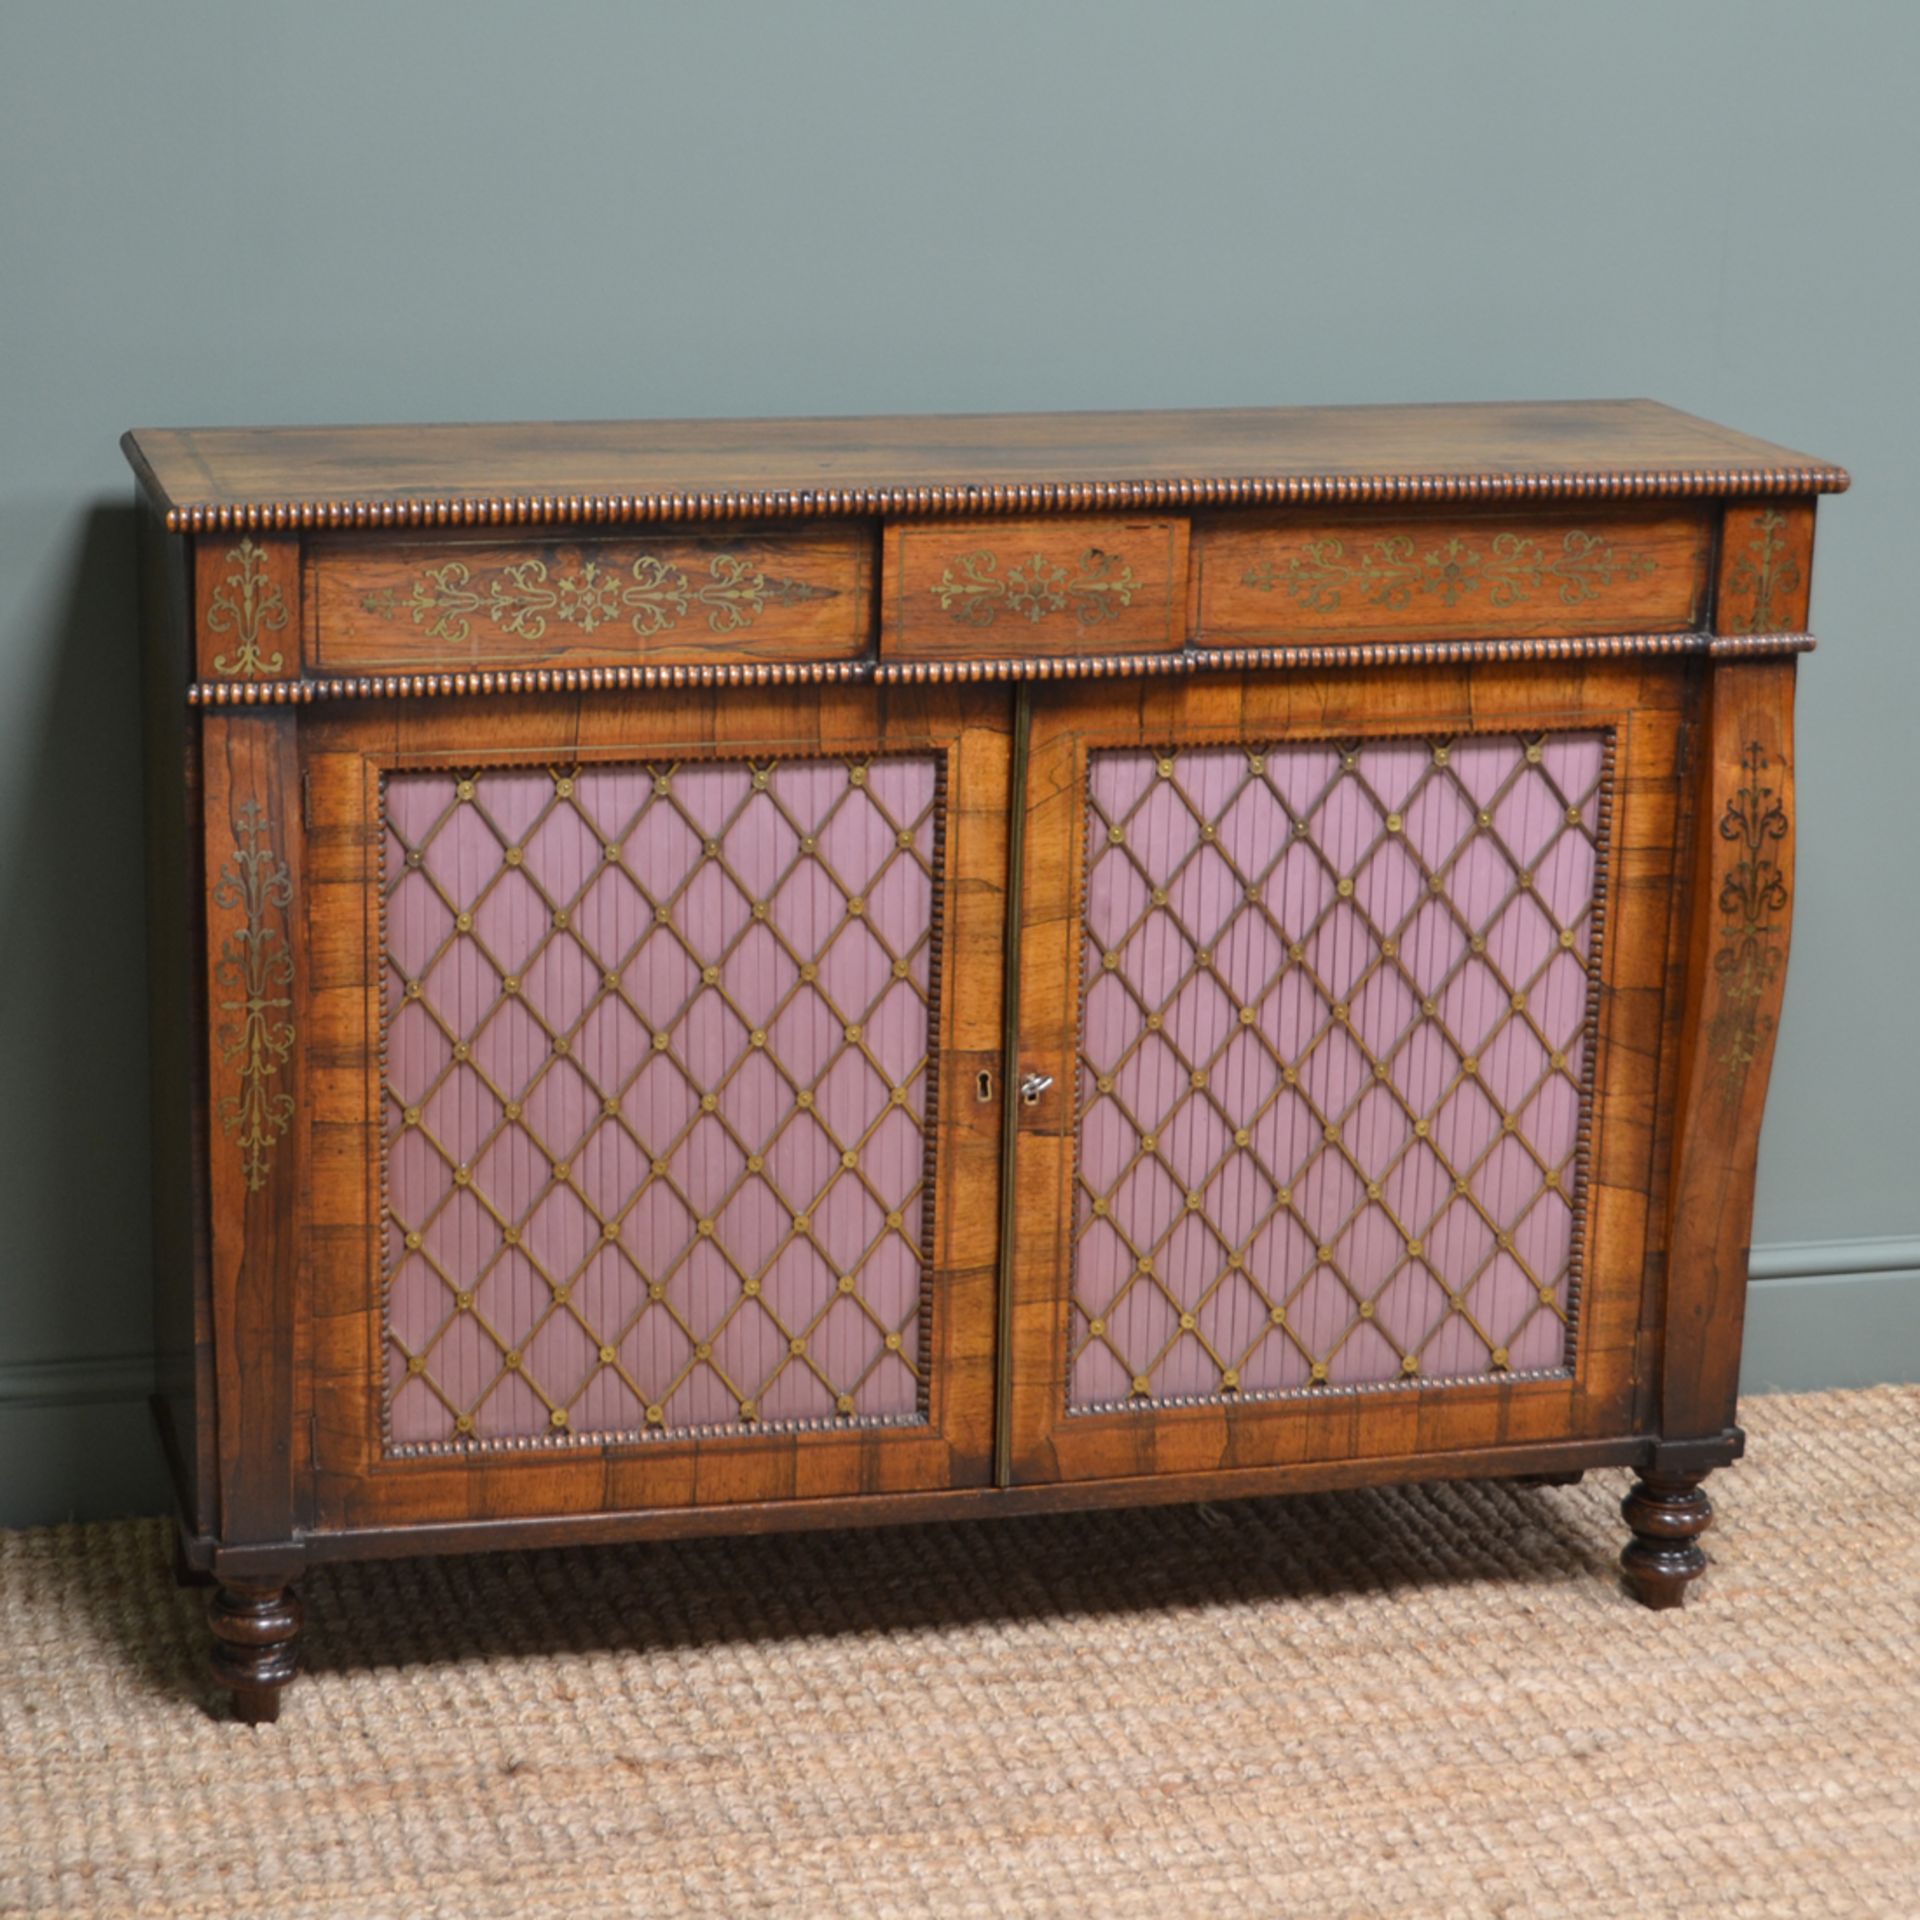 Spectacular Warm Rosewood Antique Cabinet with Brass Inlay - Image 4 of 8